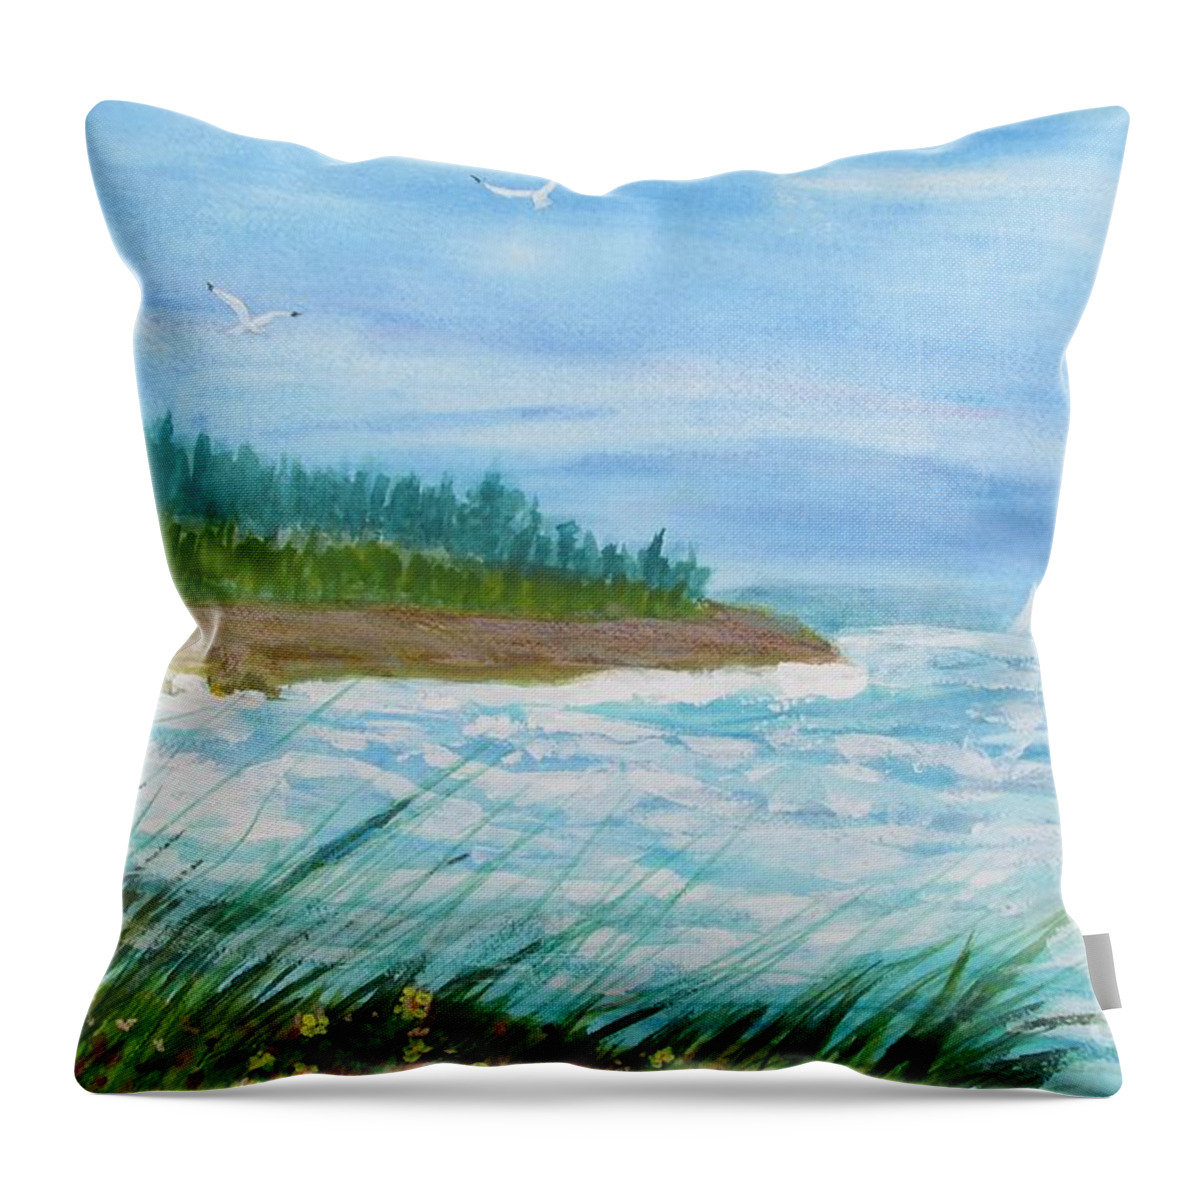 Seascape Throw Pillow featuring the painting Shore Line by Hal Newhouser